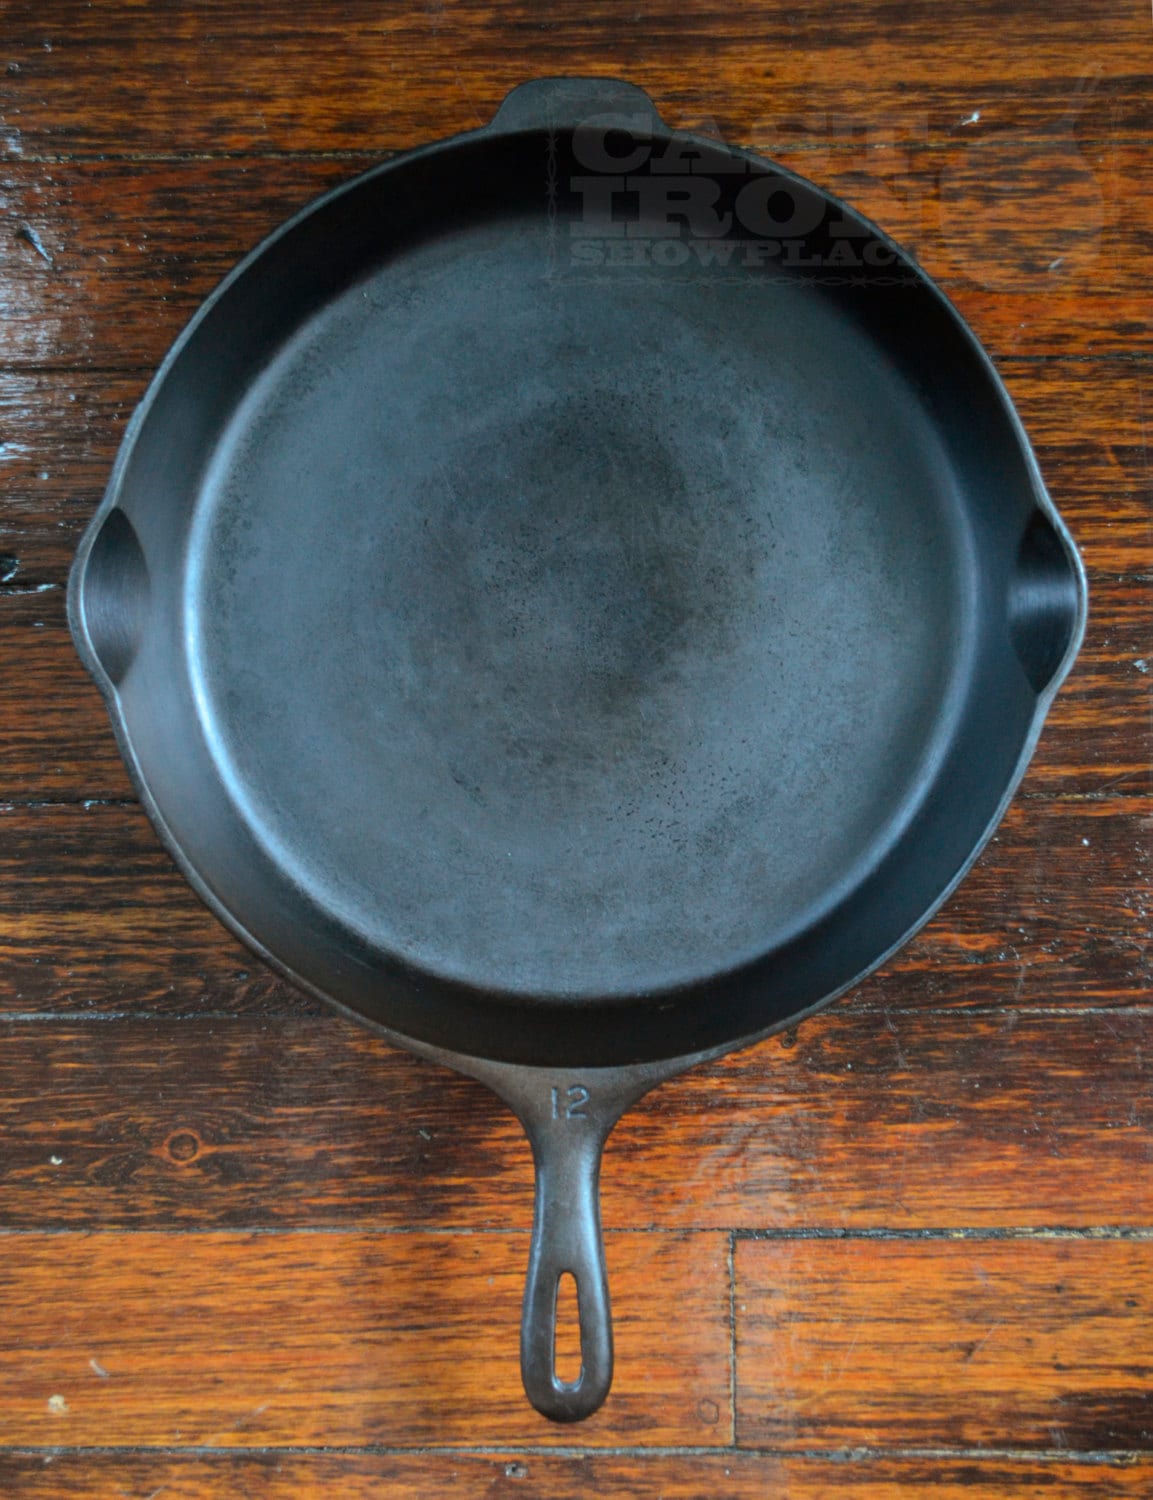 dating griswold cast iron cookware